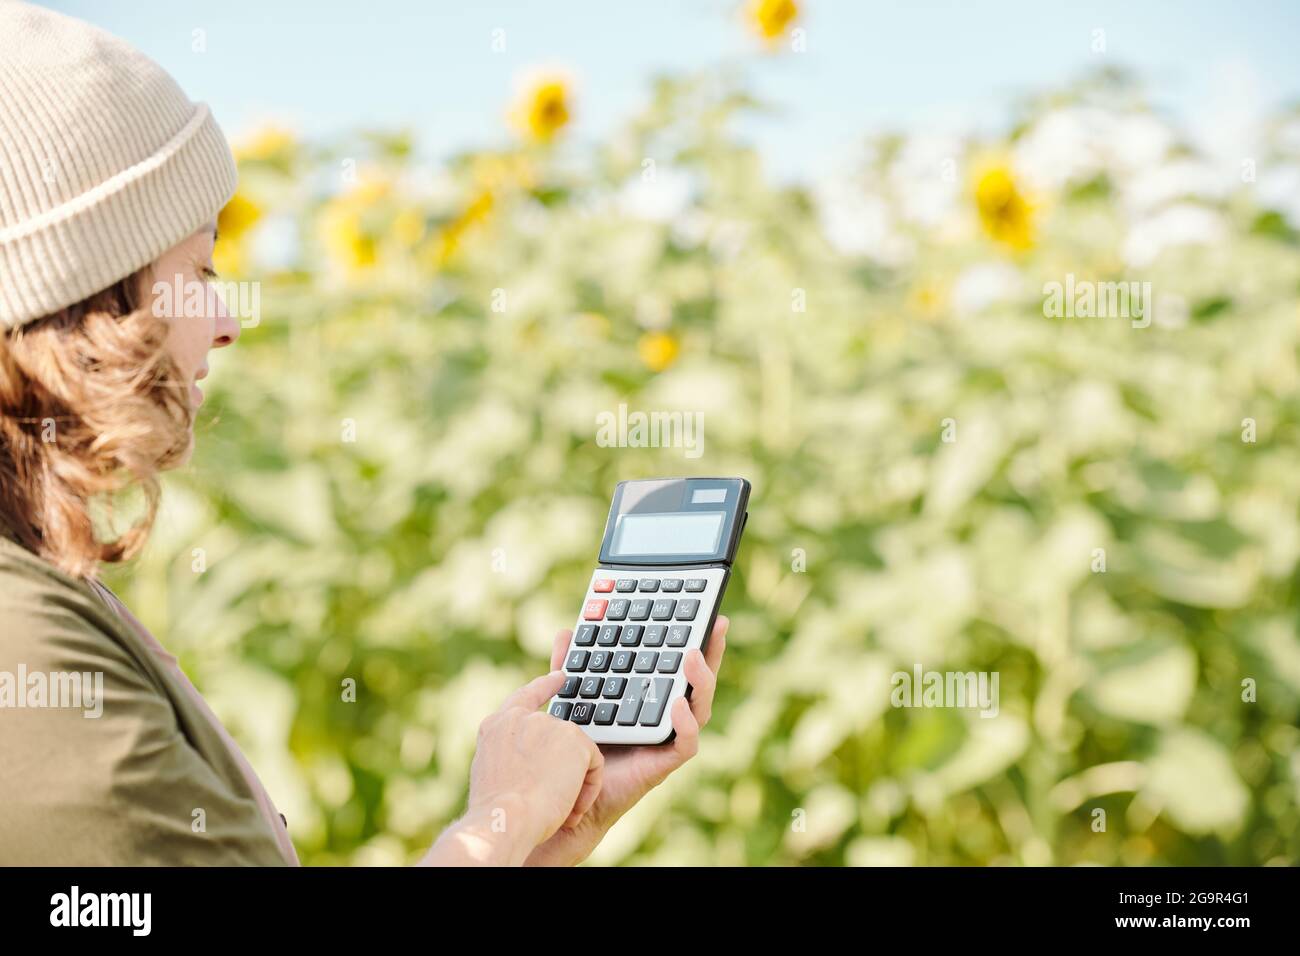 Hands of senior male farmer holding calculator with one on its display and pushing button with this number against green plants and leaves Stock Photo